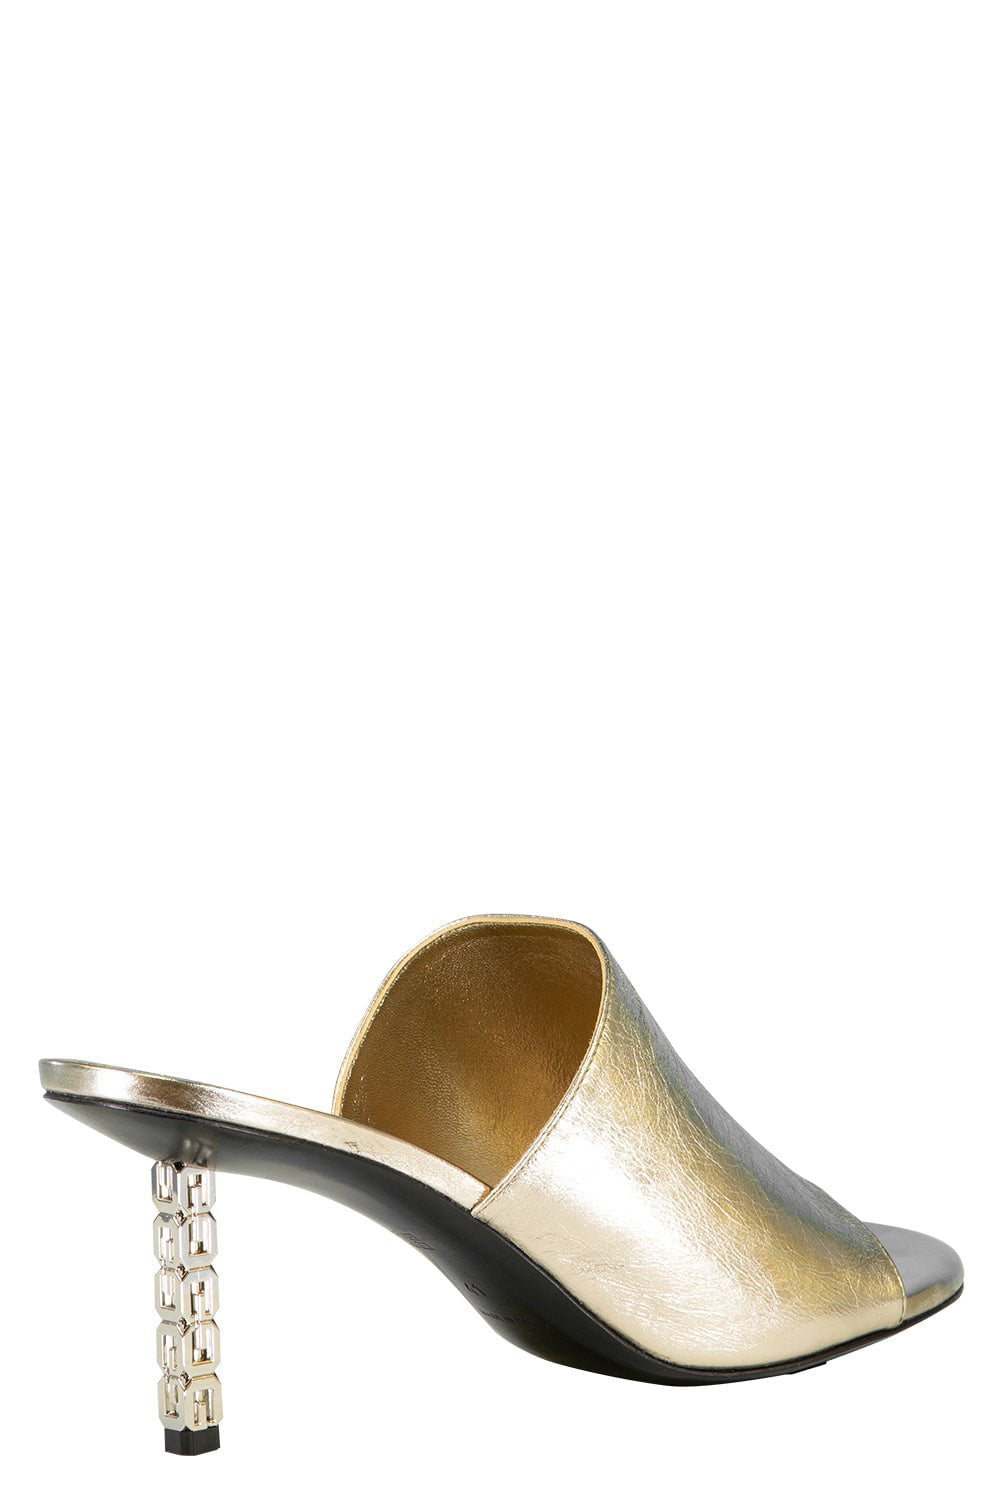 GIVENCHY-G Cube Mule - Dusty Gold-